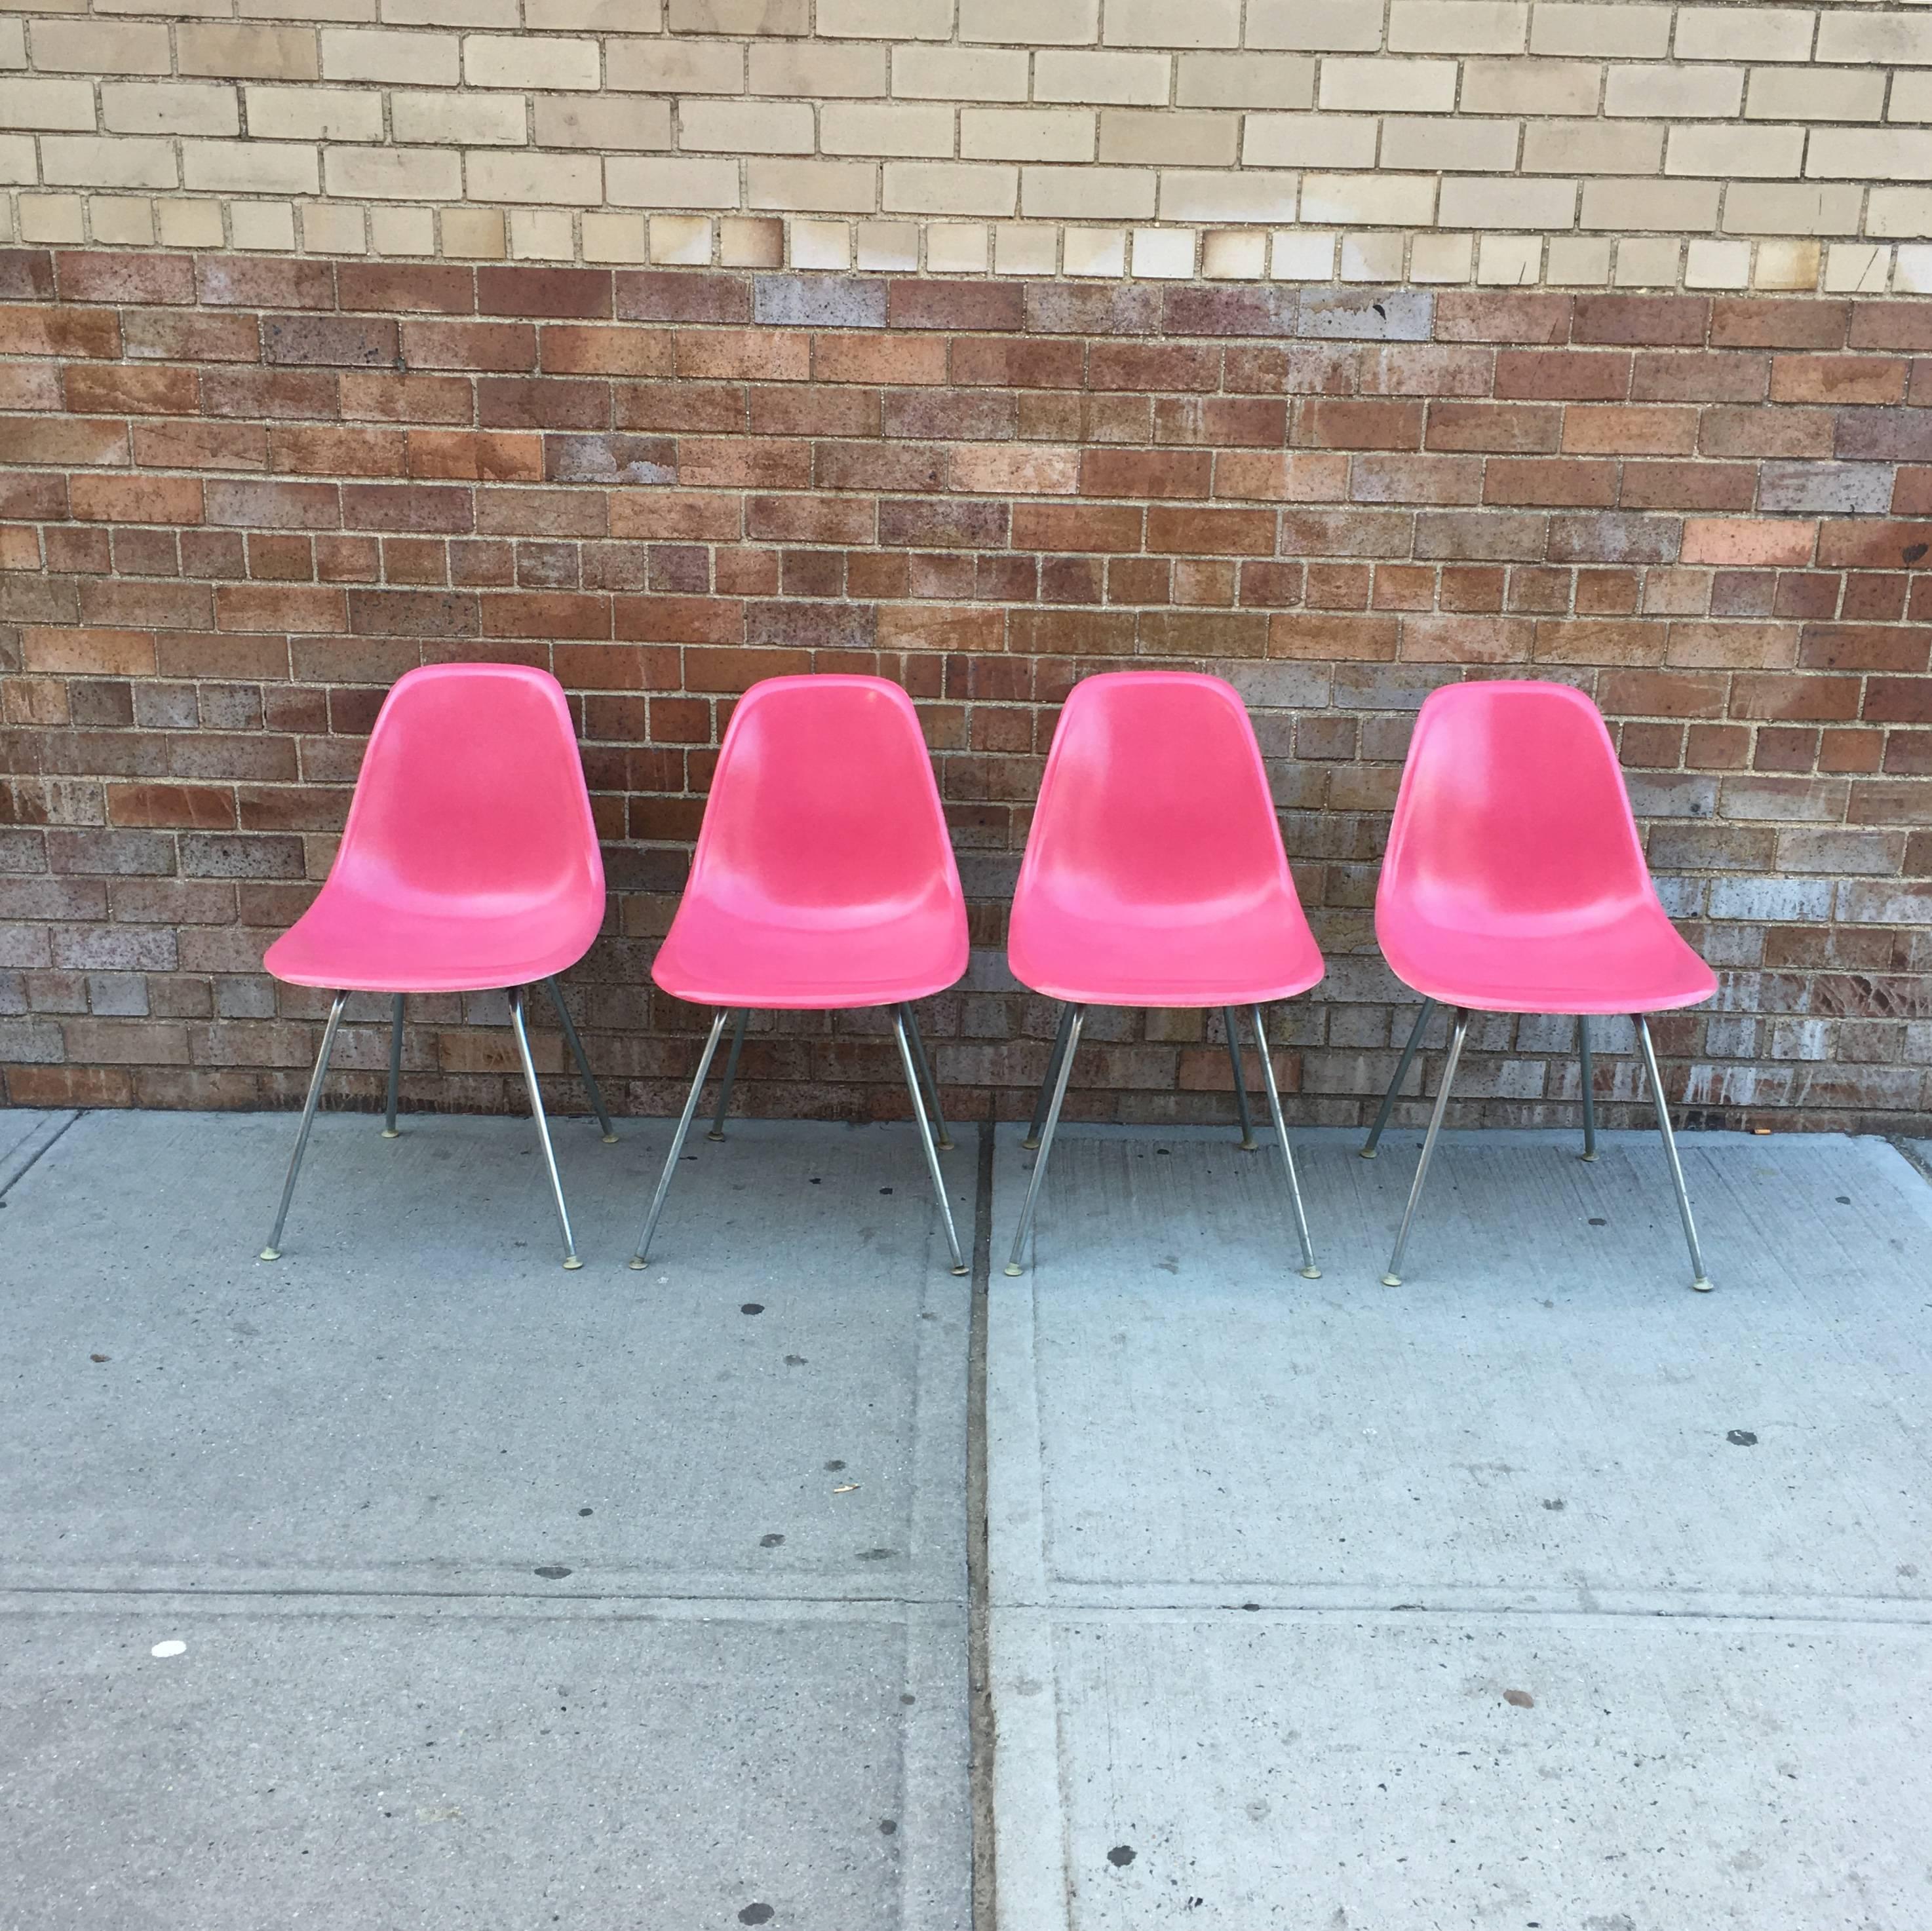 If you don’t know now you know.

Special setback of 4 supremely rare flamingo pink Eames fiberglass dining chairs for Herman Miller. In very good vintage condition. Also available on black H base, dowel leg base, or black or zinc Eiffe base.